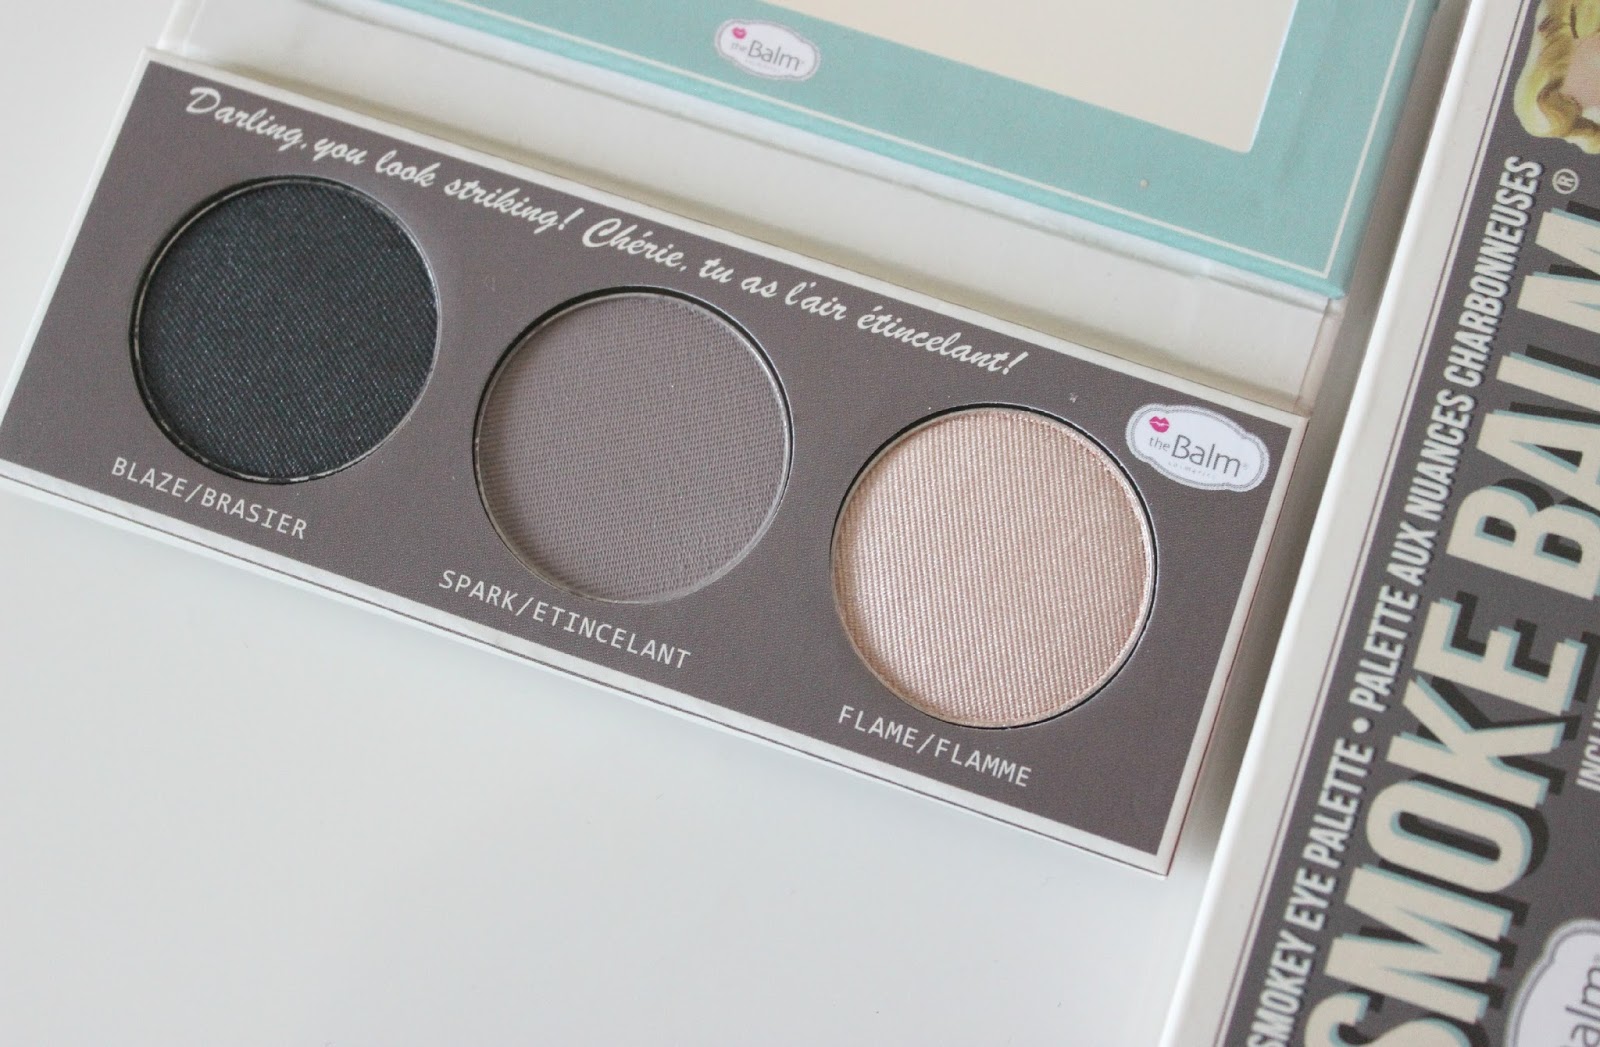 A picture of theBalm Smoke Balm eyeshadow palette